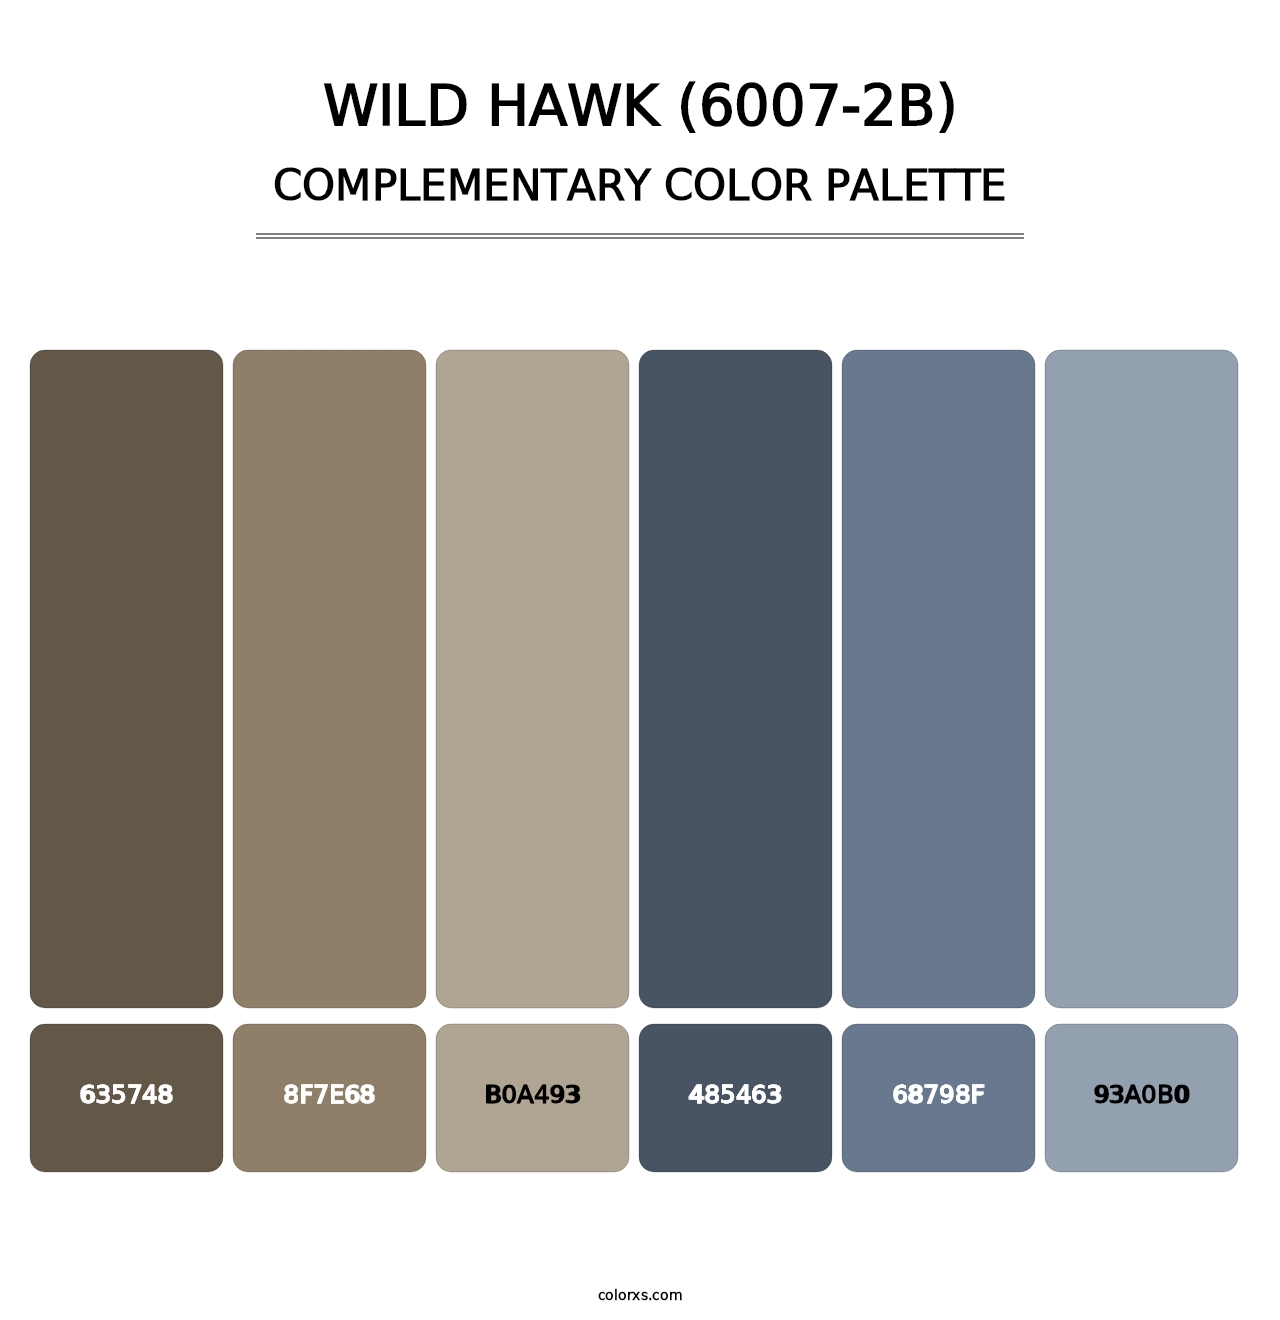 Wild Hawk (6007-2B) - Complementary Color Palette